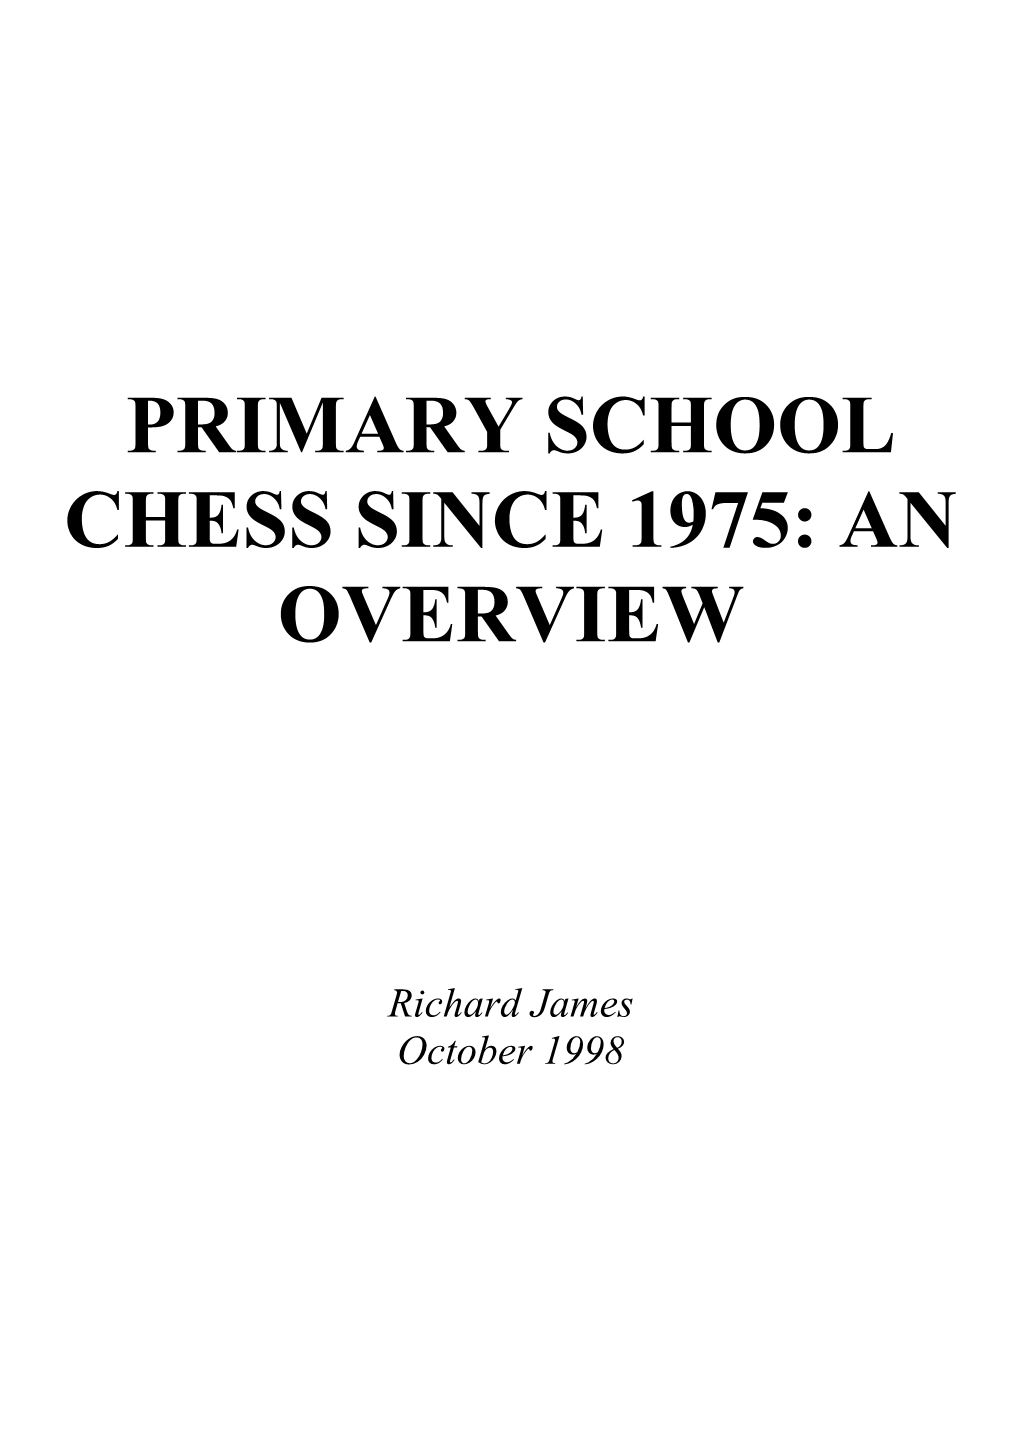 Primary School Chess Since 1975